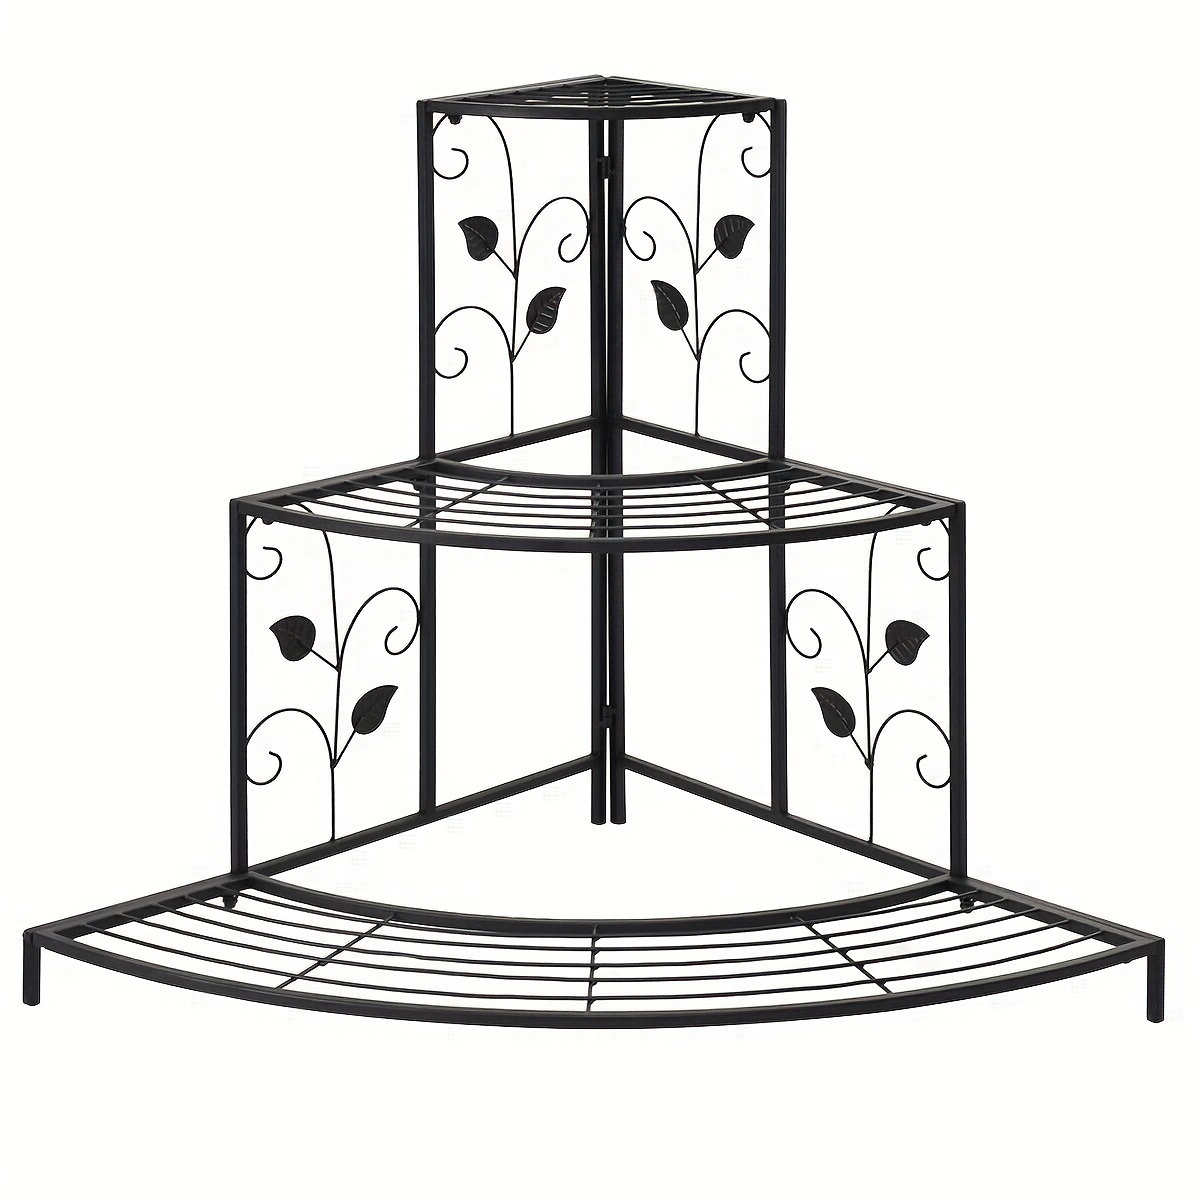 

1pc 3-tier Corner Metal Flower Rack, Floral Plant Stand With Vine Leaf Design, Stair-style Display Ladder, 42x34x15 Inches, Home & Garden Decor, Load Capacity Up To 33lbs Per Shelf